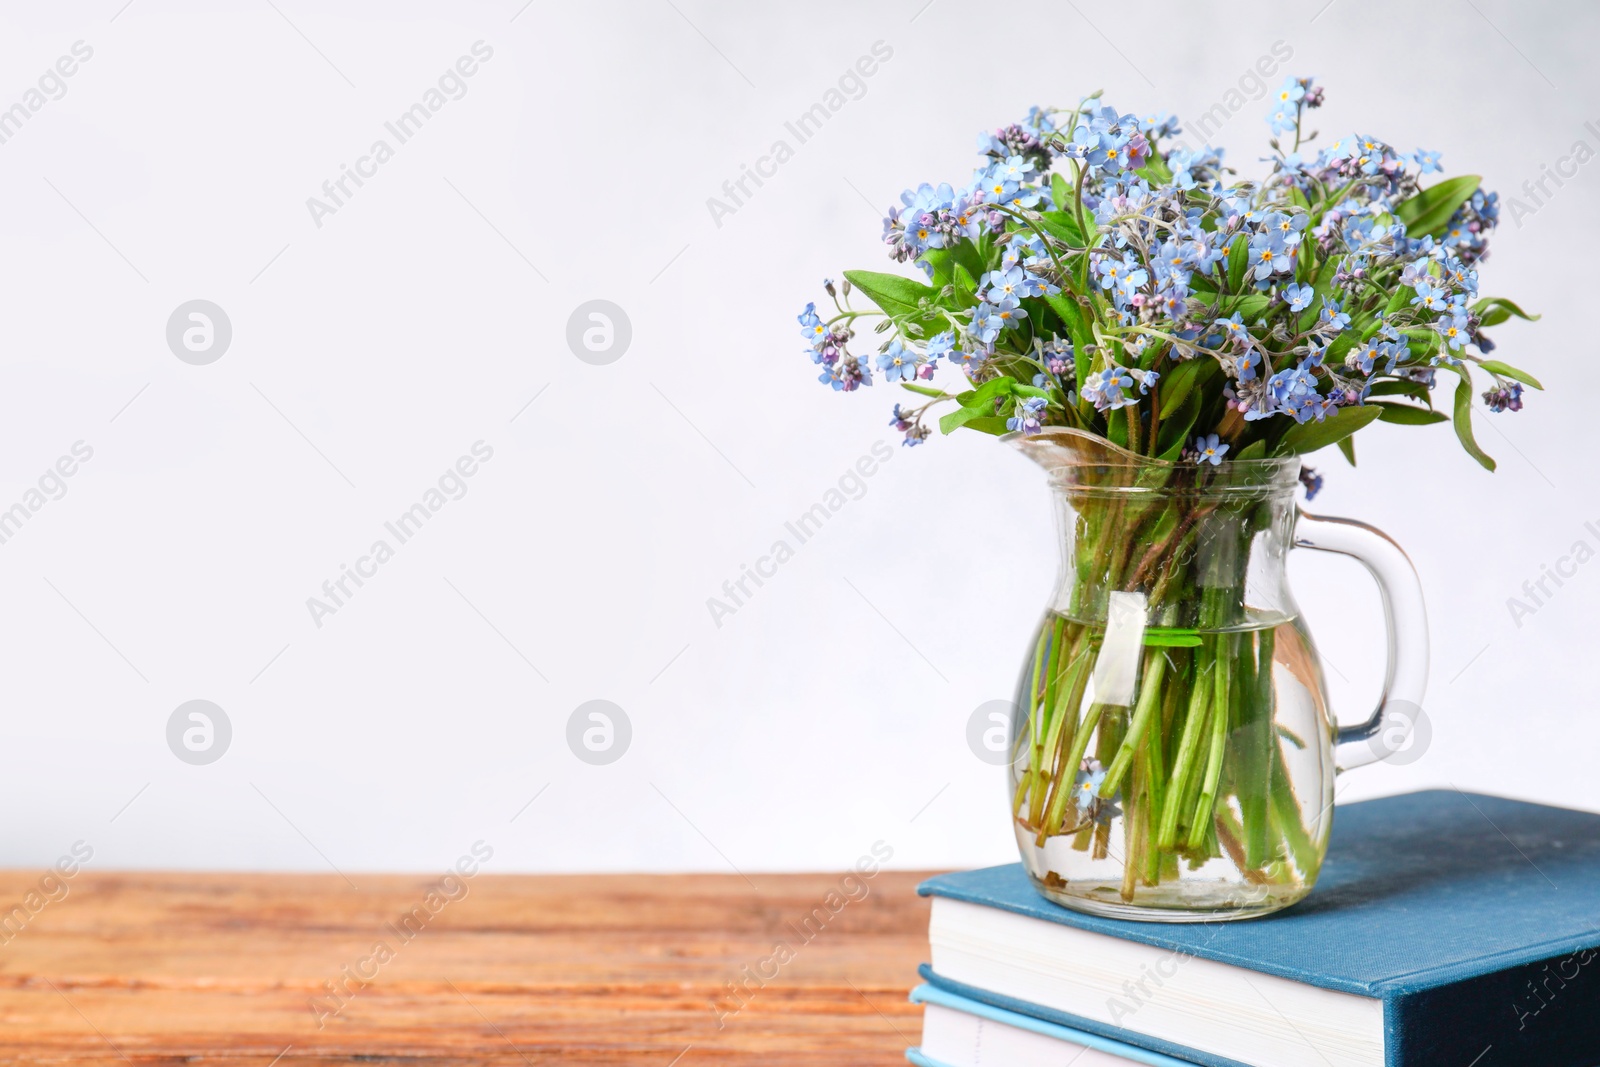 Photo of Bouquet of beautiful forget-me-not flowers in glass jug and books on wooden table against light background, space for text